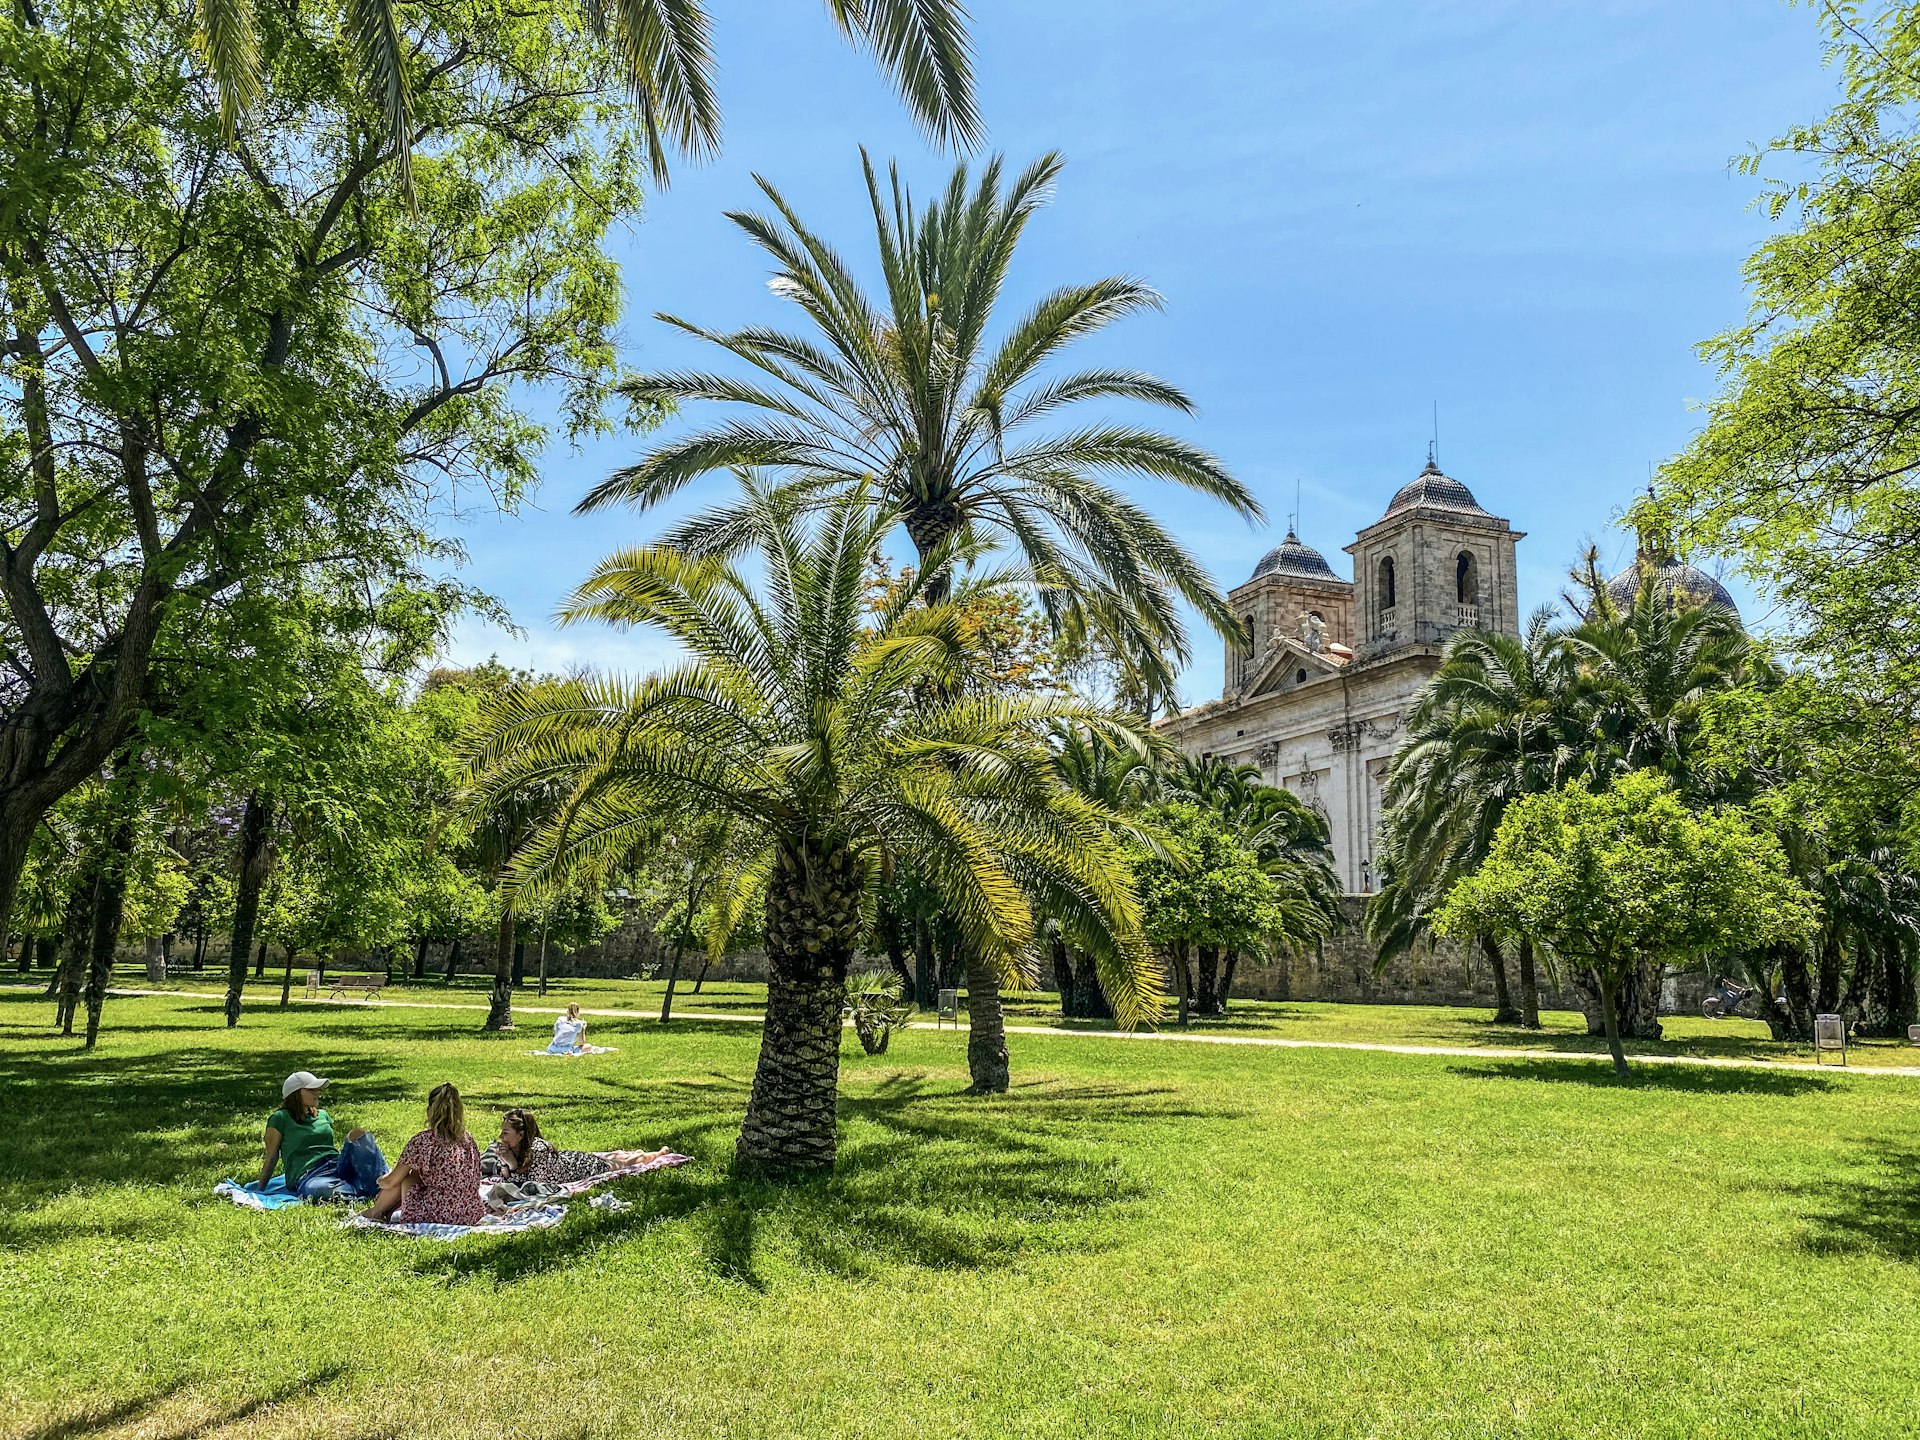 People picnic on the grass under a palm tree in a wide open garden overlooked by medieval towers 